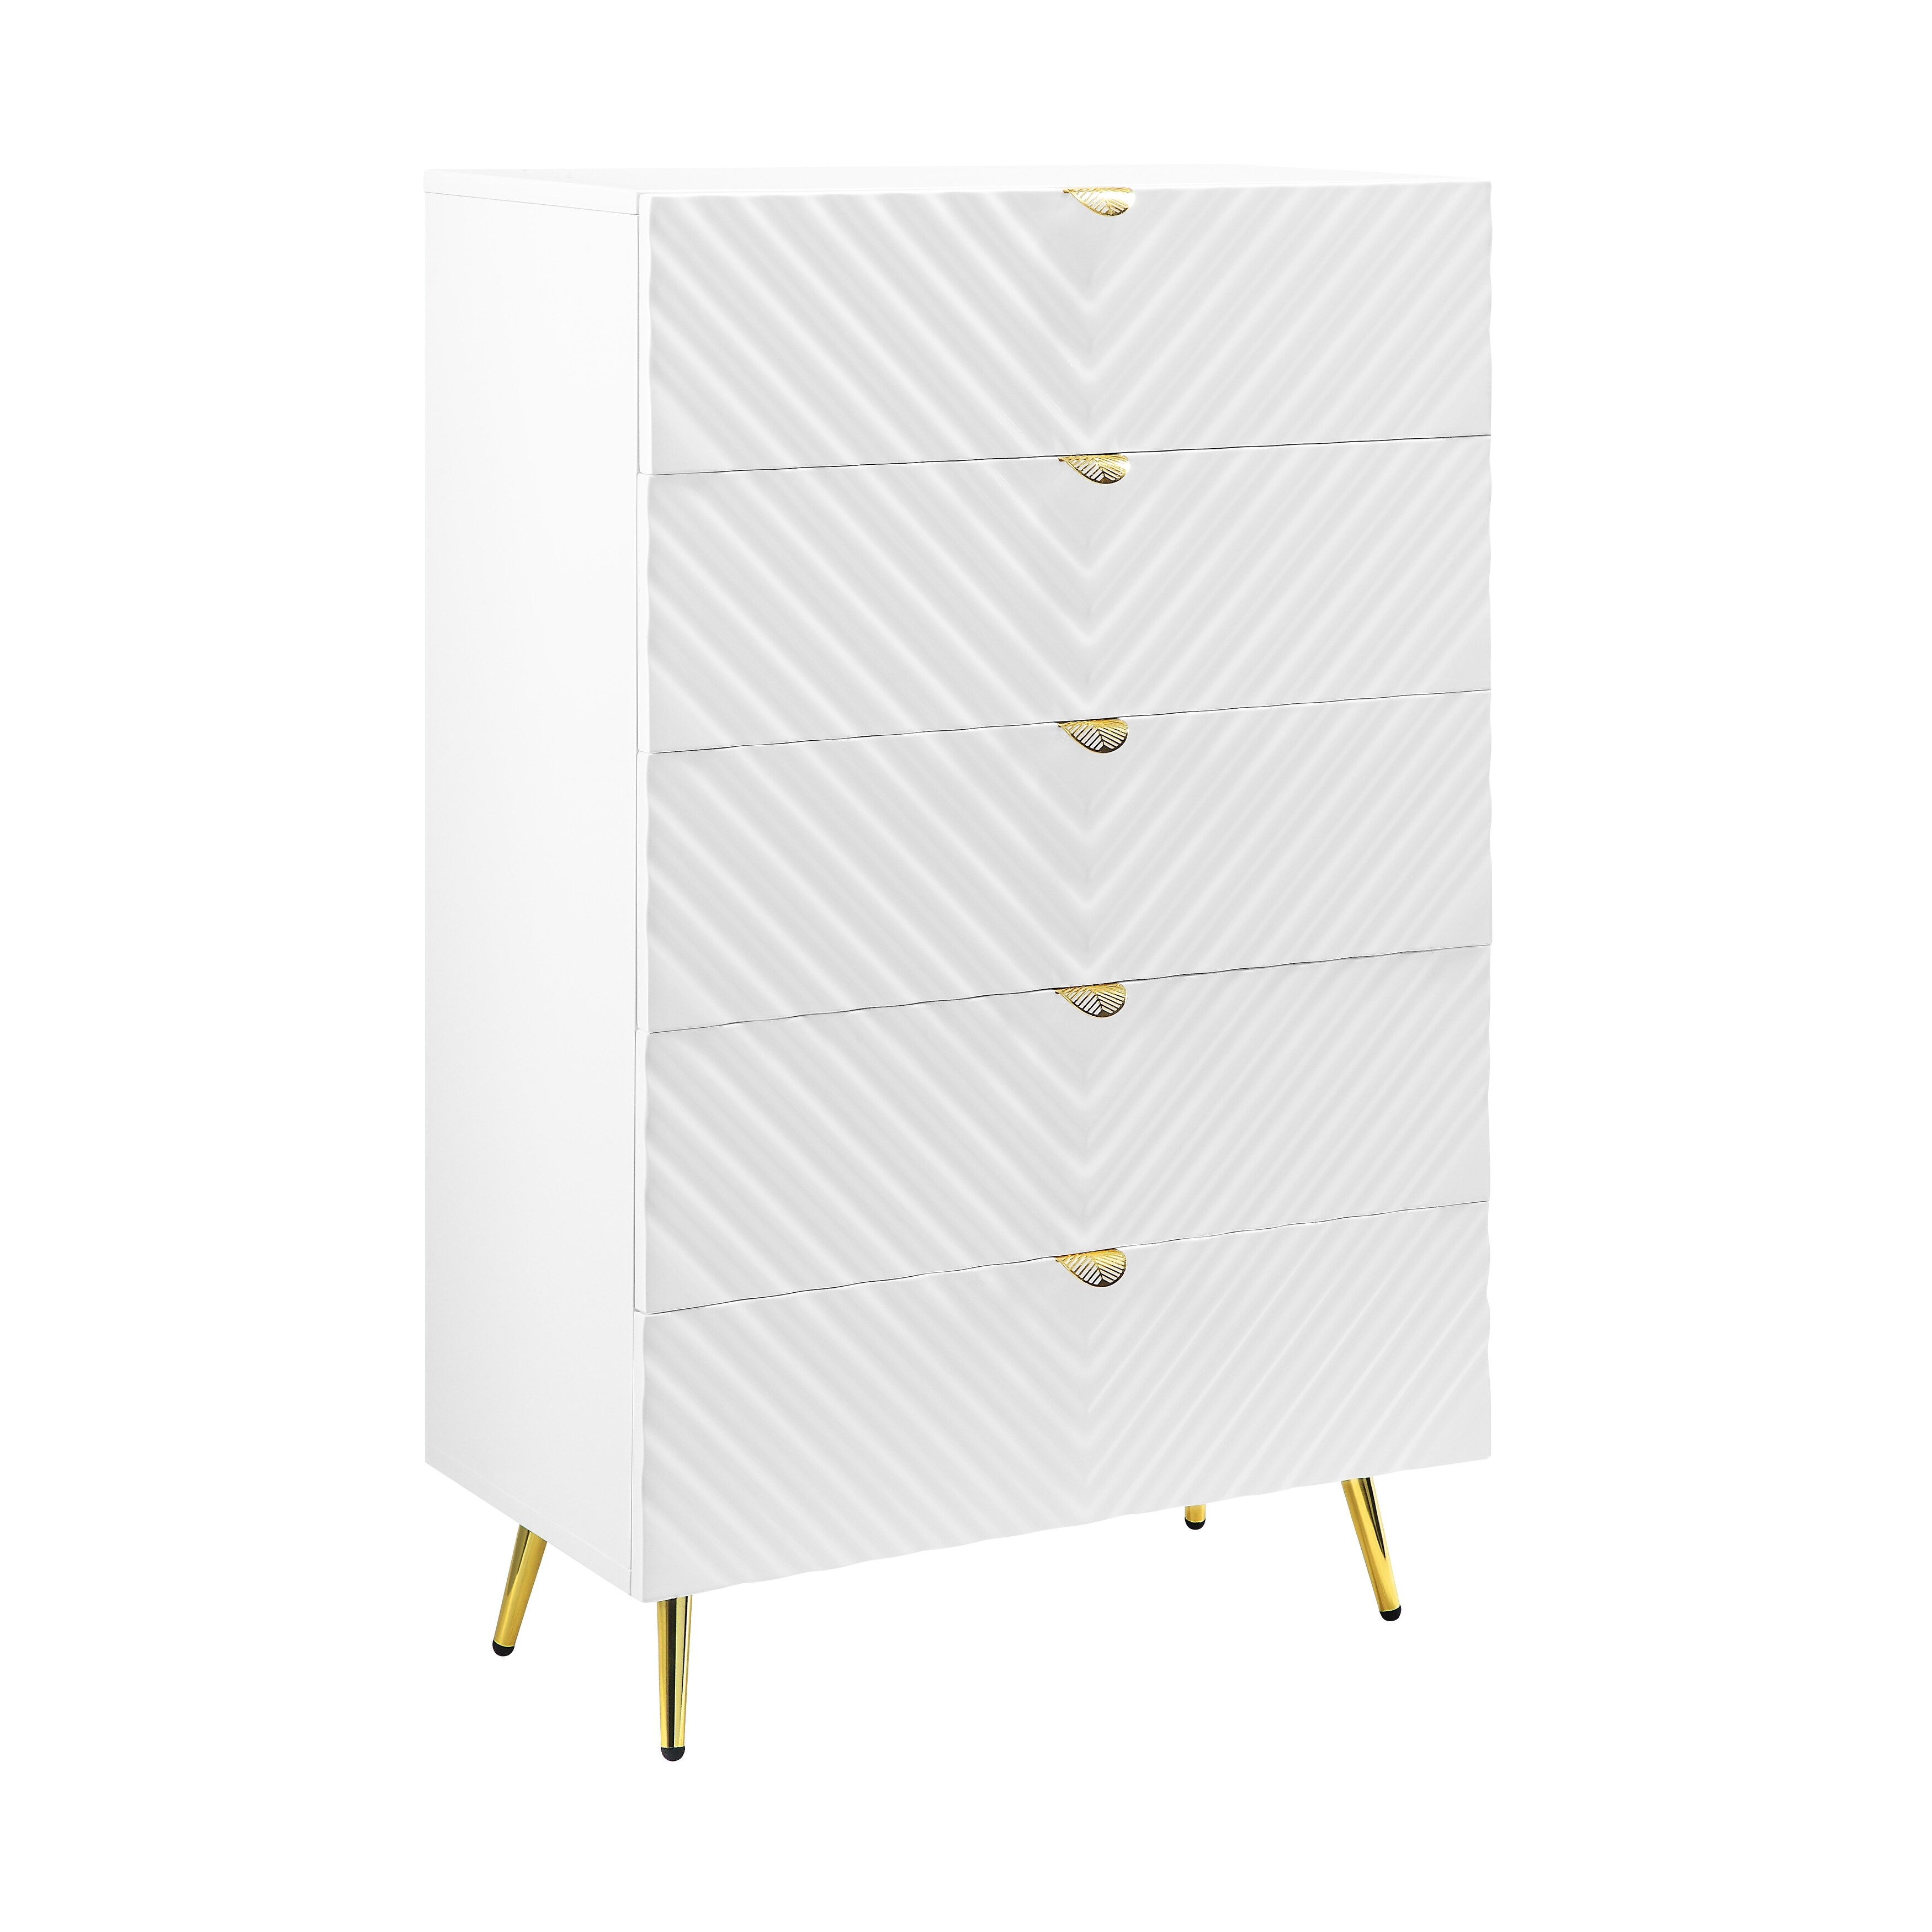 White High Gloss Finish Finish KD Structure•High Gloss Finish•Wave Pattern Design•Metal Legs,Accent Tables,Console Tables